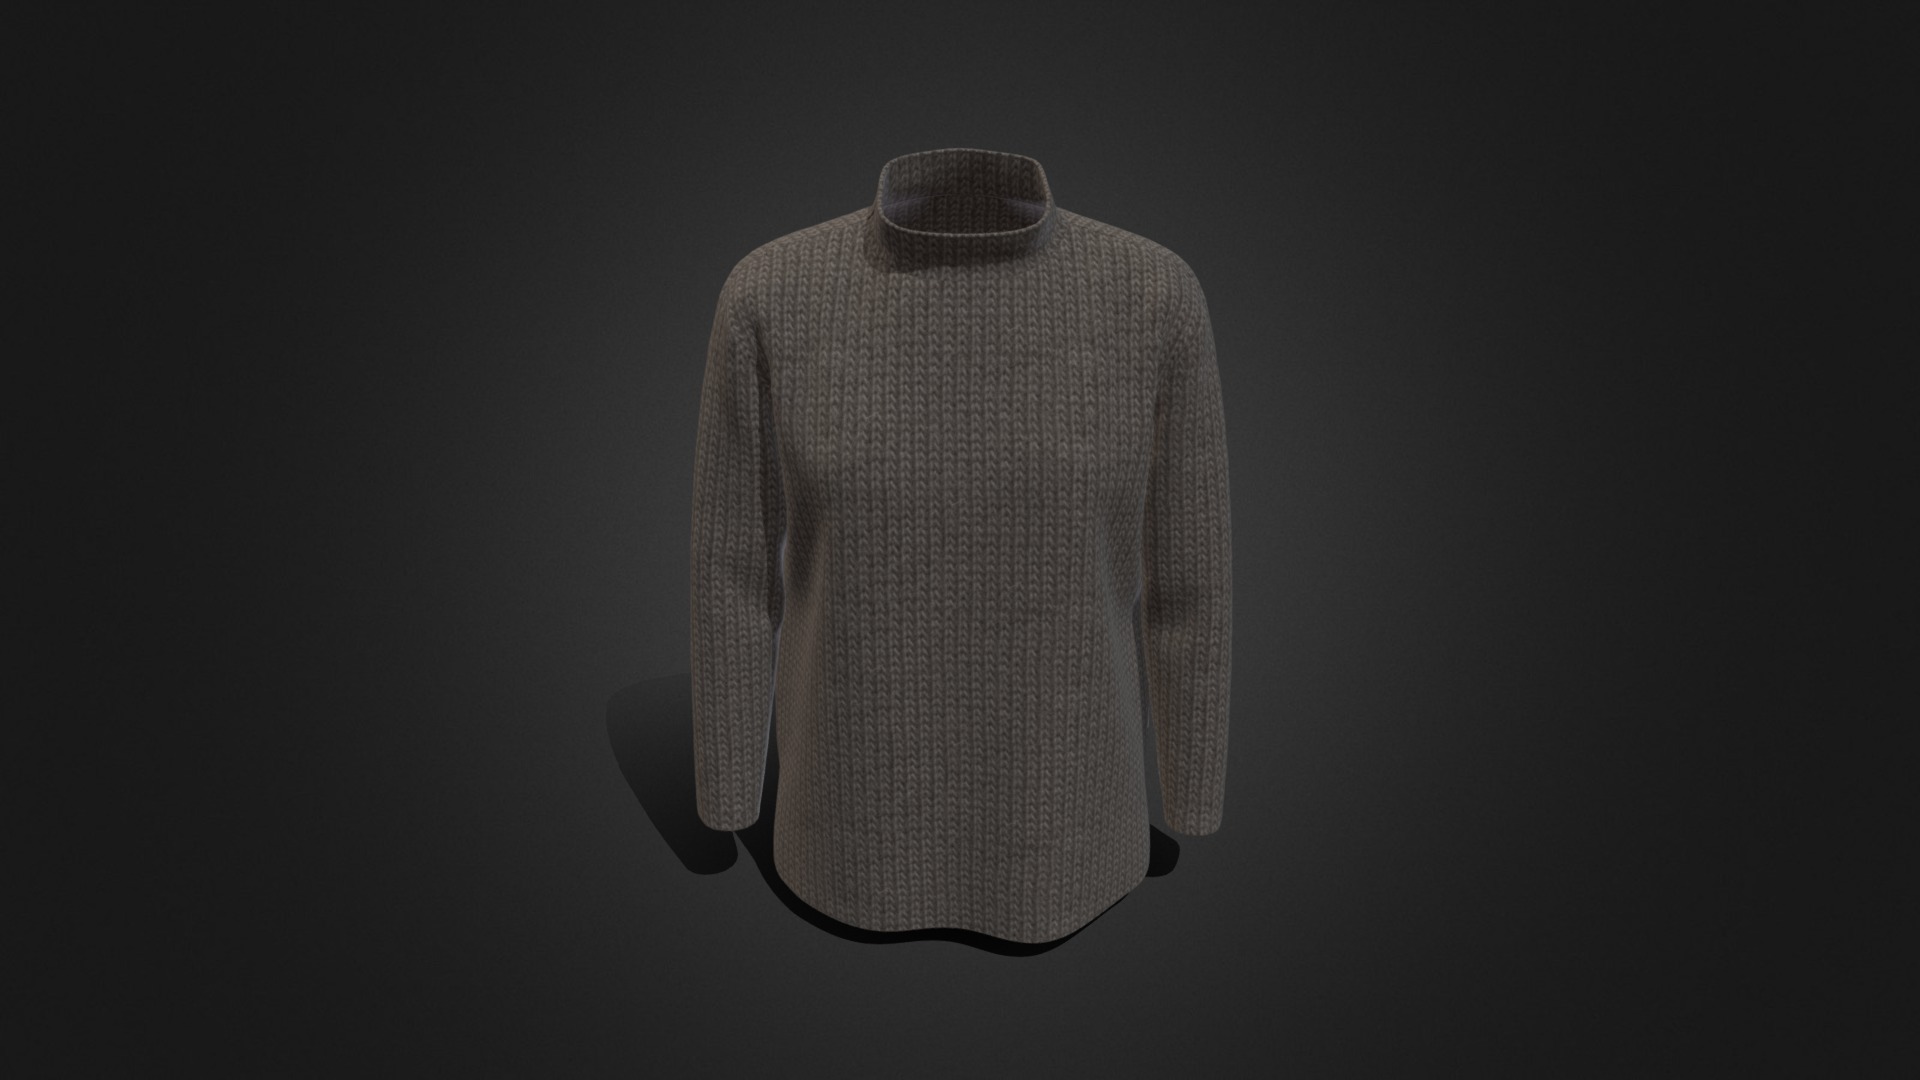 3D model a high-neck T-shirt - This is a 3D model of the a high-neck T-shirt. The 3D model is about a grey shirt on a black background.